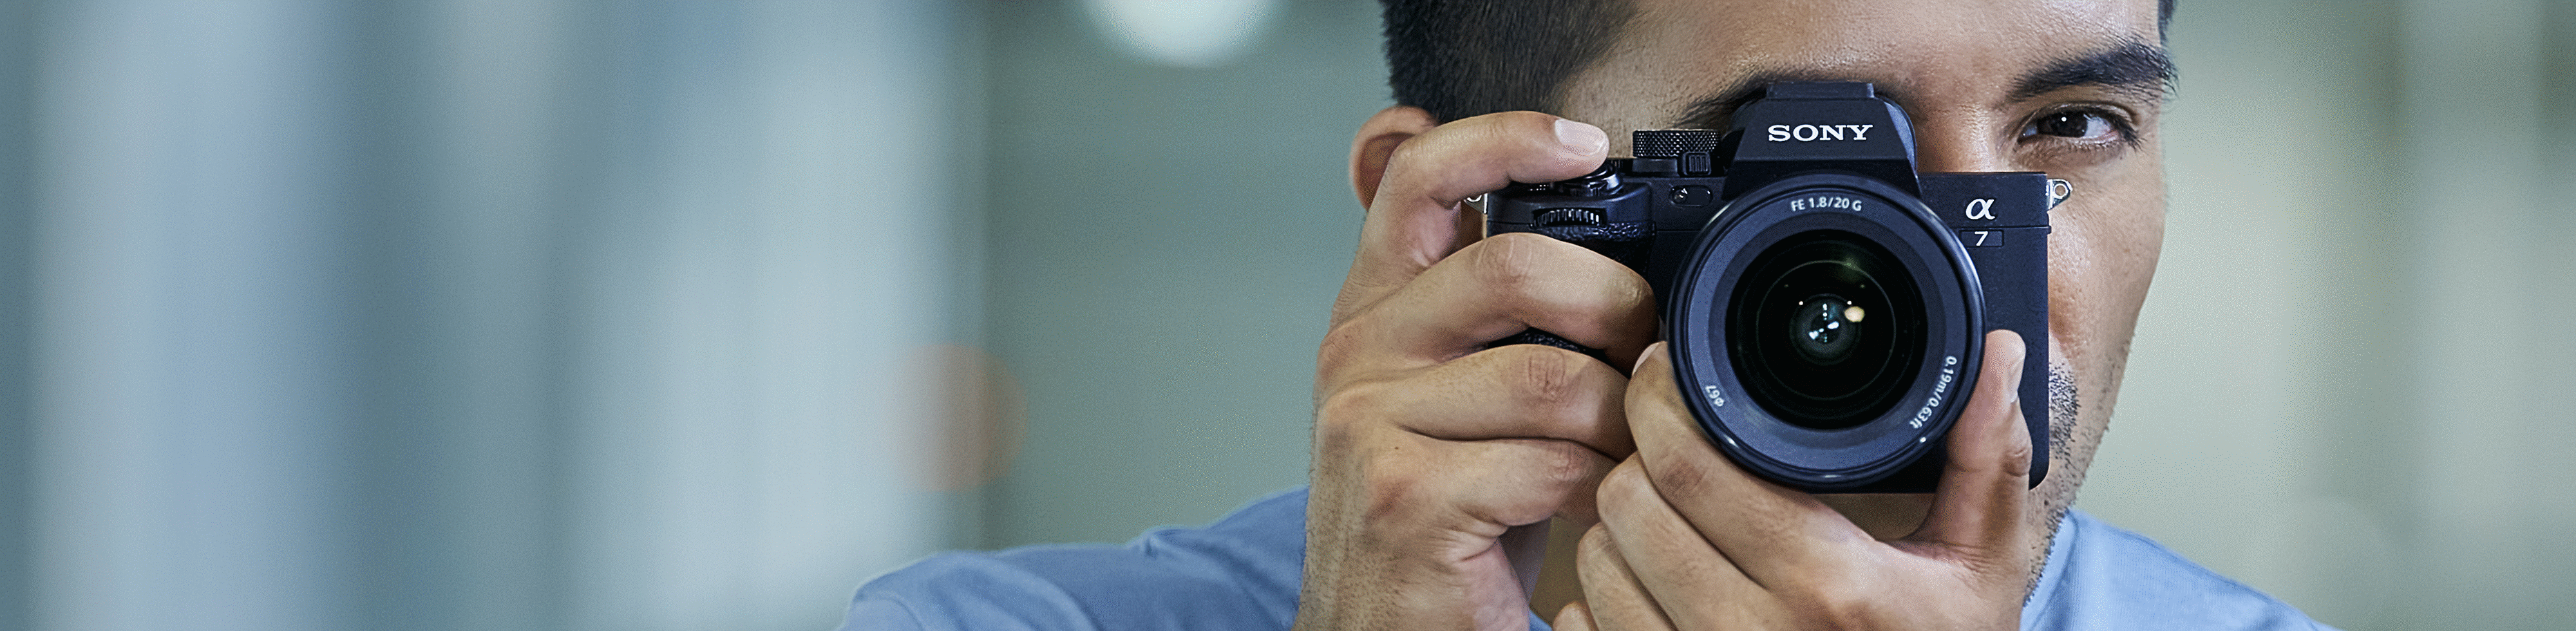 Photo of a photographer looking through the viewfinder while shooting still photos